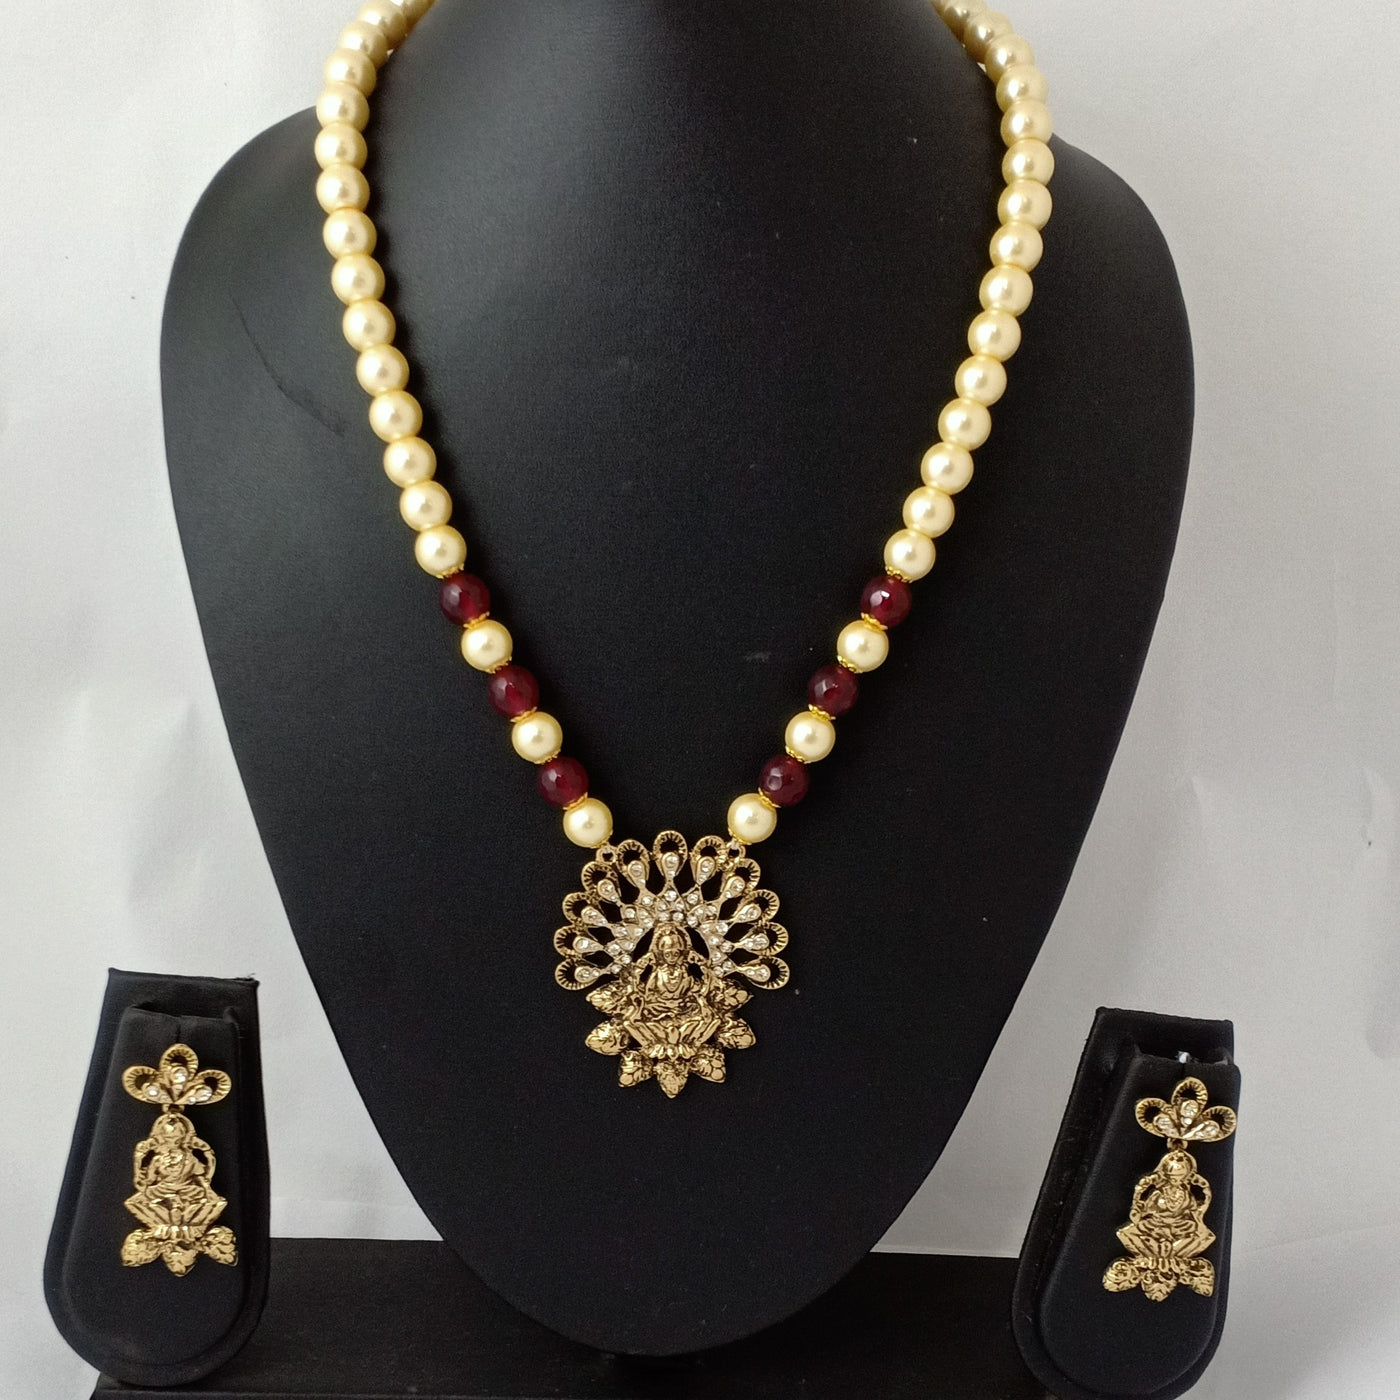 Estele Gold Plated Exquisite Laxmi Devi Pearl Necklace Set with Austrian Crystals & Red Beads for Women